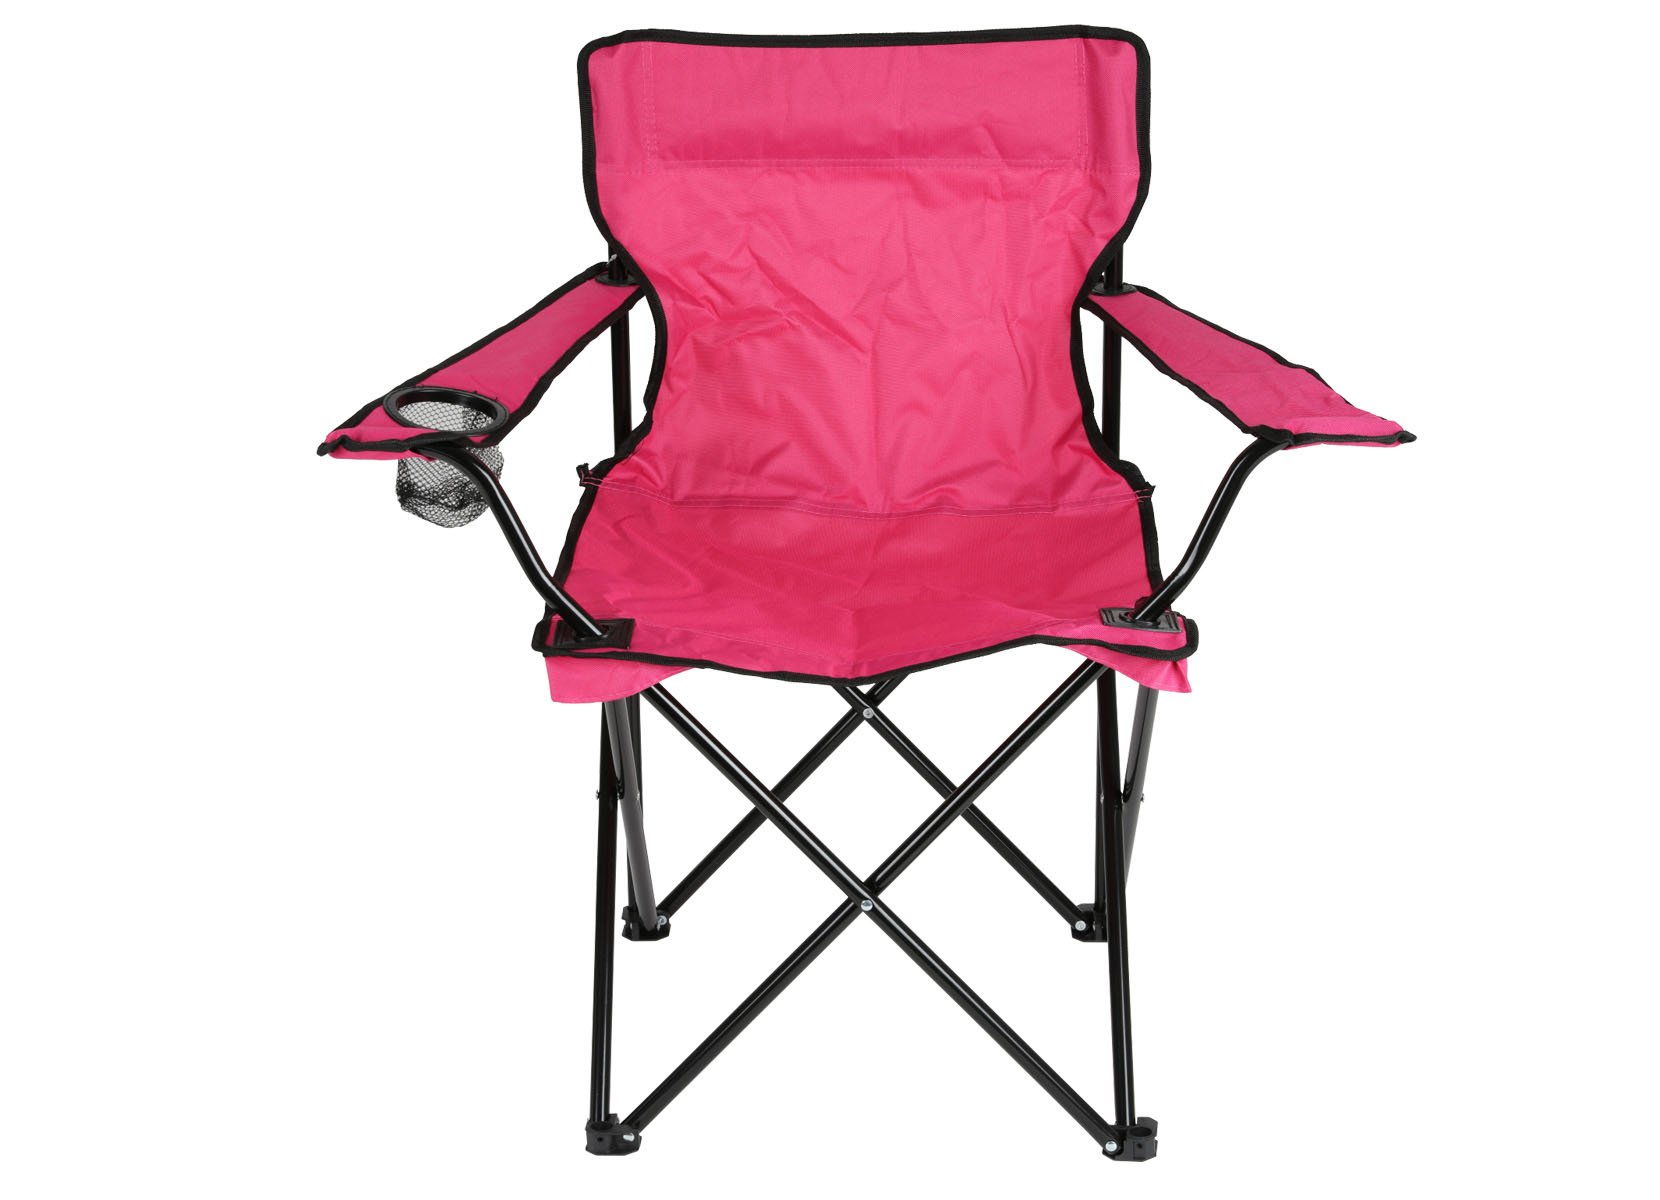 Camping-Klappsessel Pink